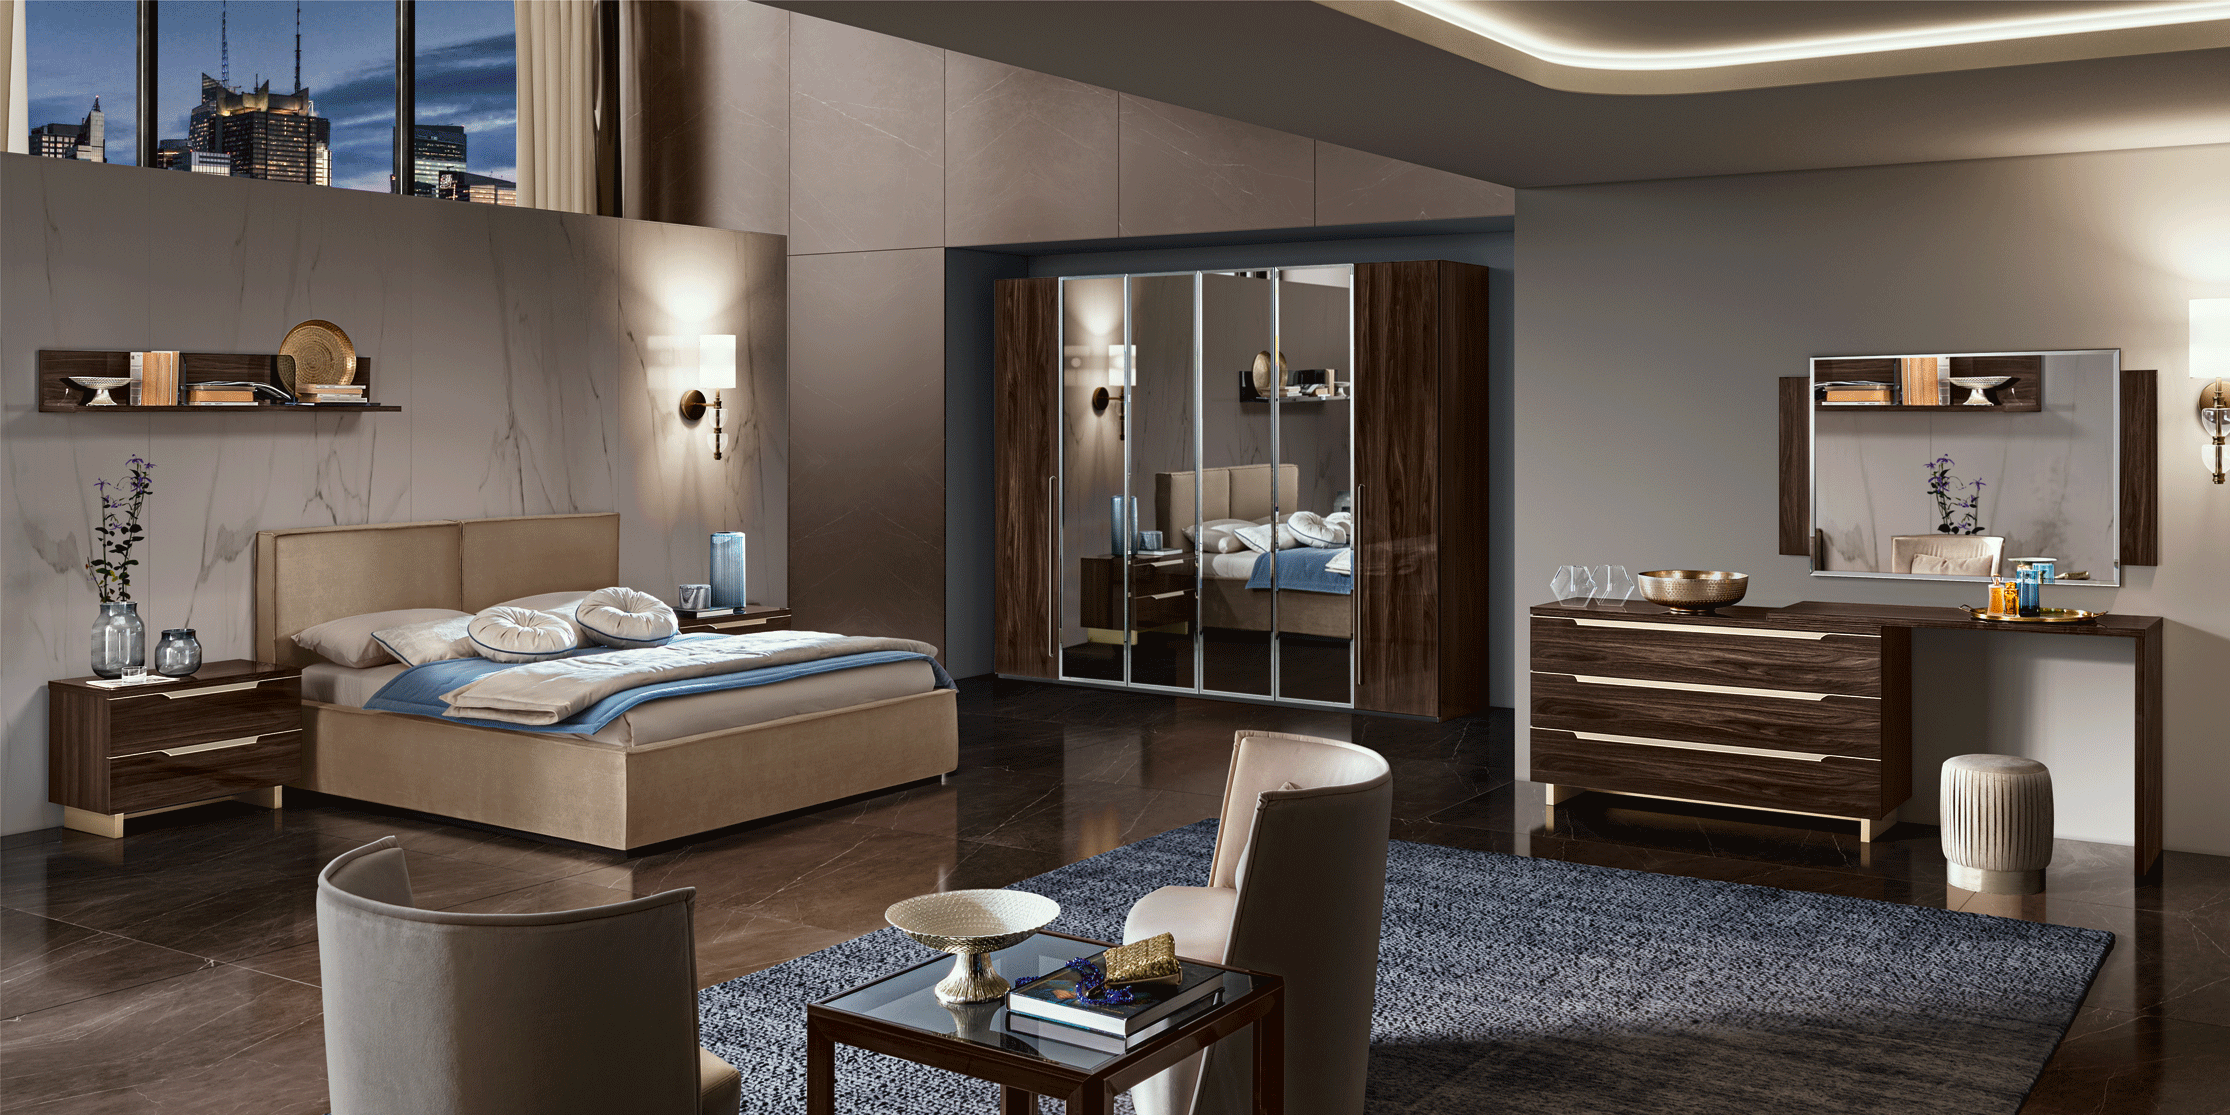 Bedroom Furniture Classic Bedrooms QS and KS Smart Bedgroup Walnut Additional items